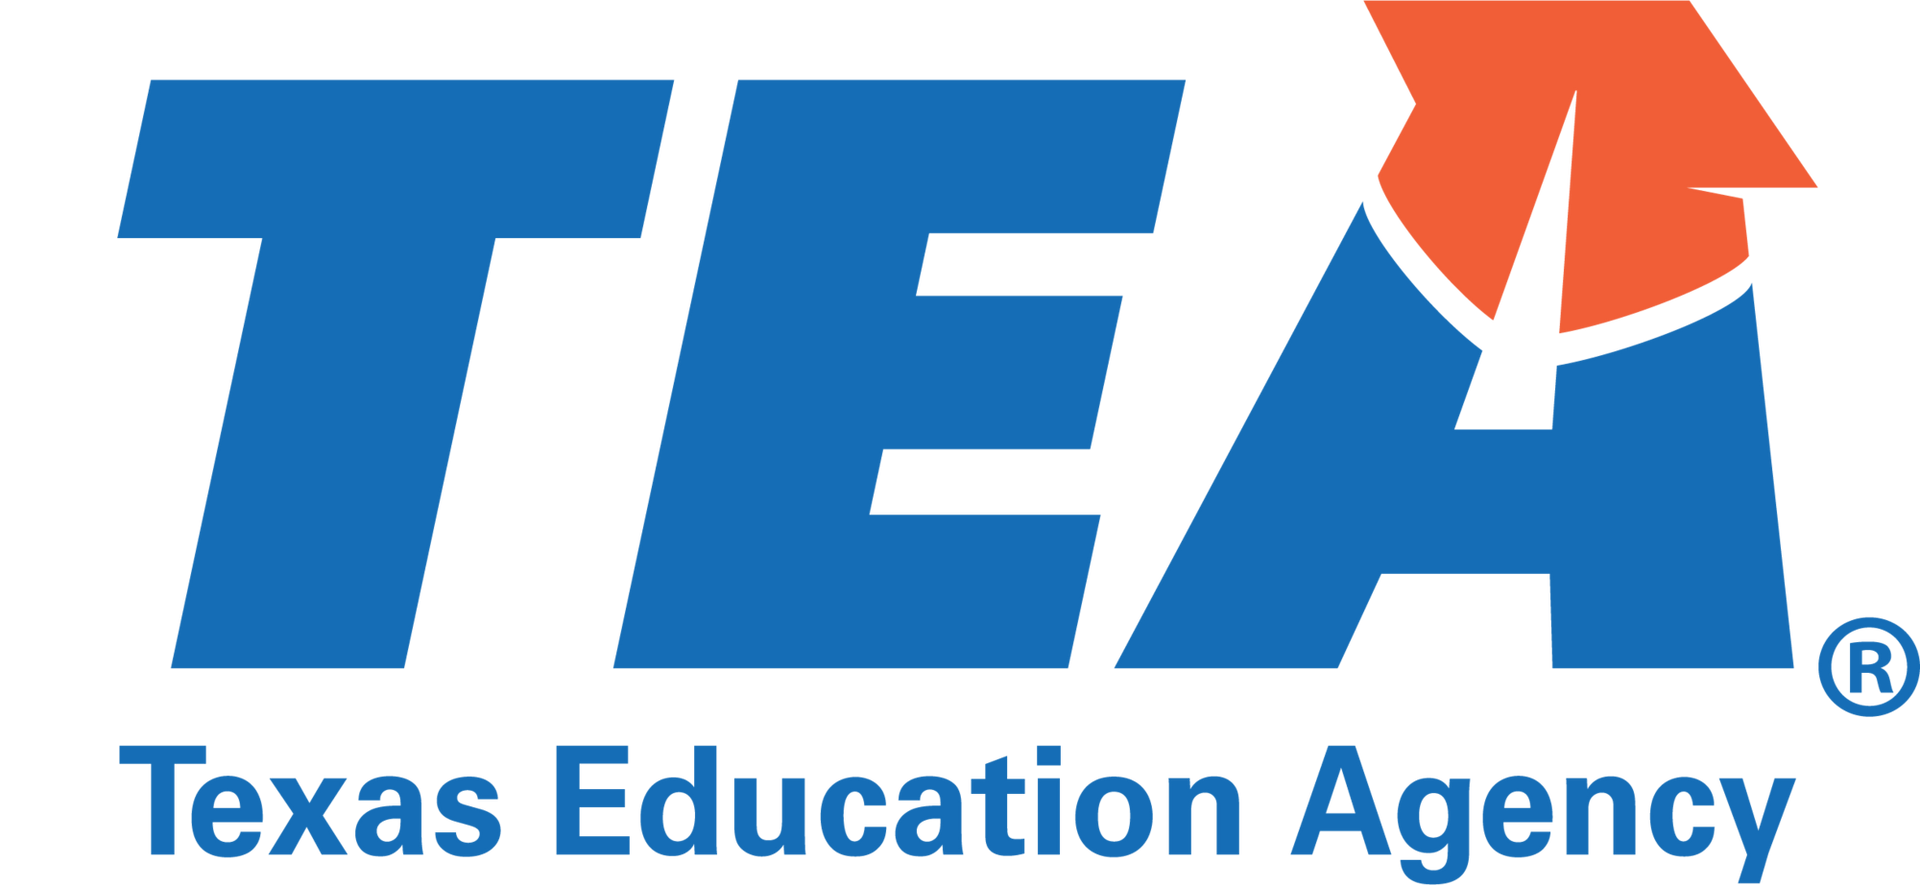 The logo for the texas education agency is blue and red